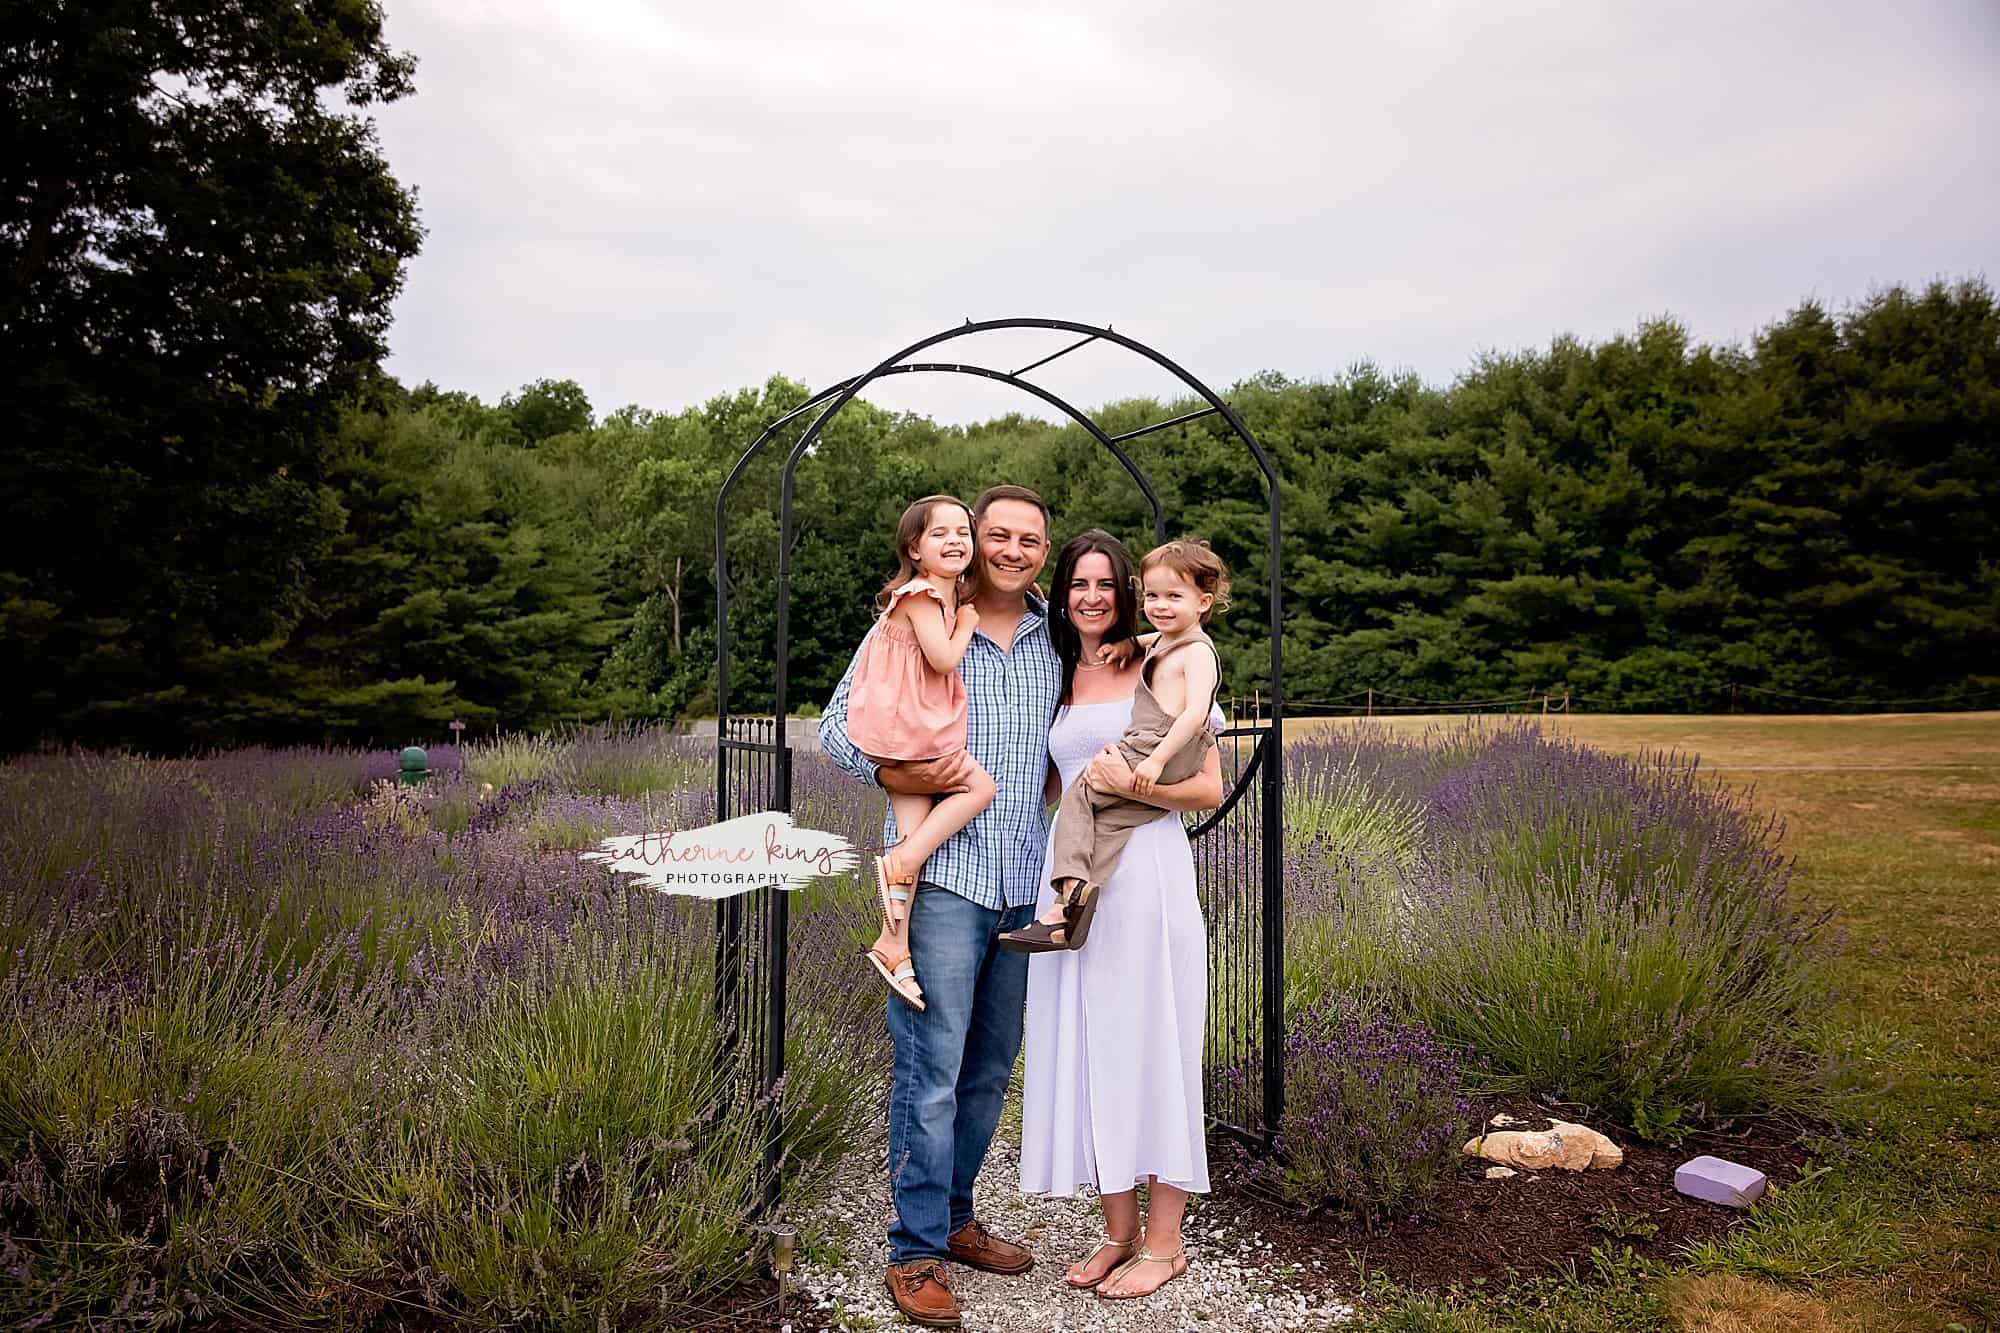 First CT Lavender Farm family photography session 2022